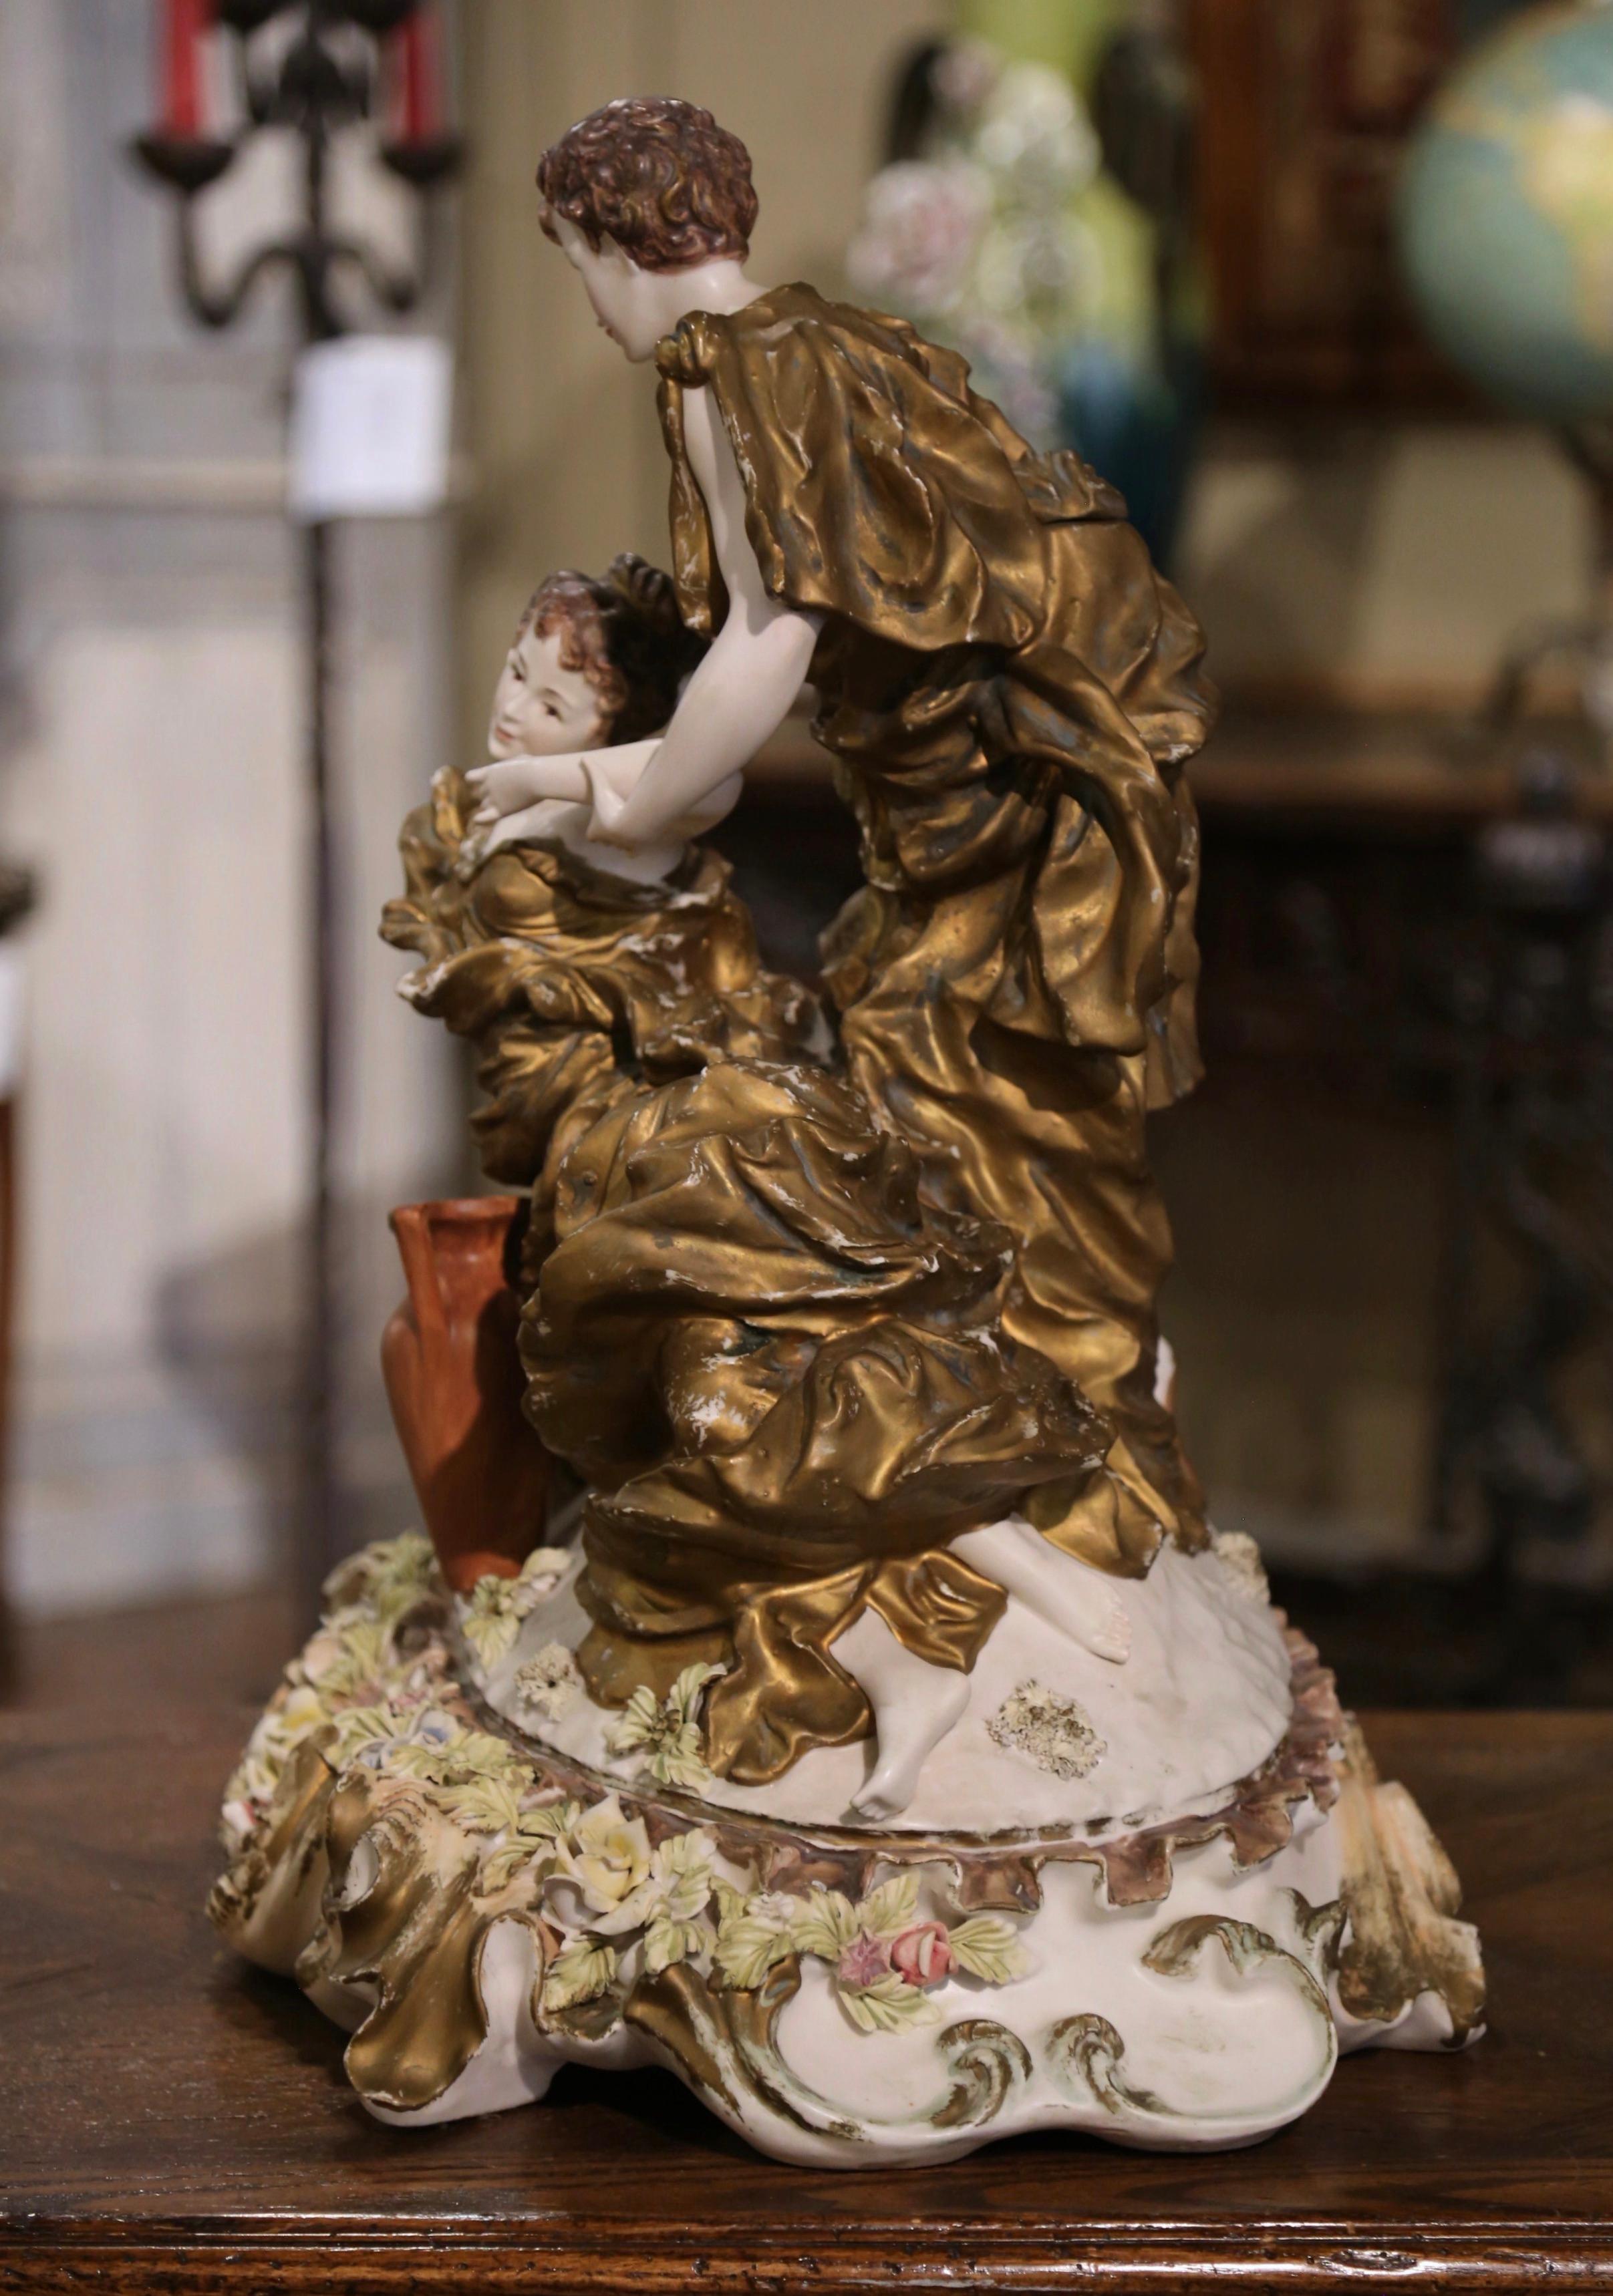 20th Century Italian Hand-Painted and Gilt Porcelain Capodimonte Figurine Statue For Sale 4